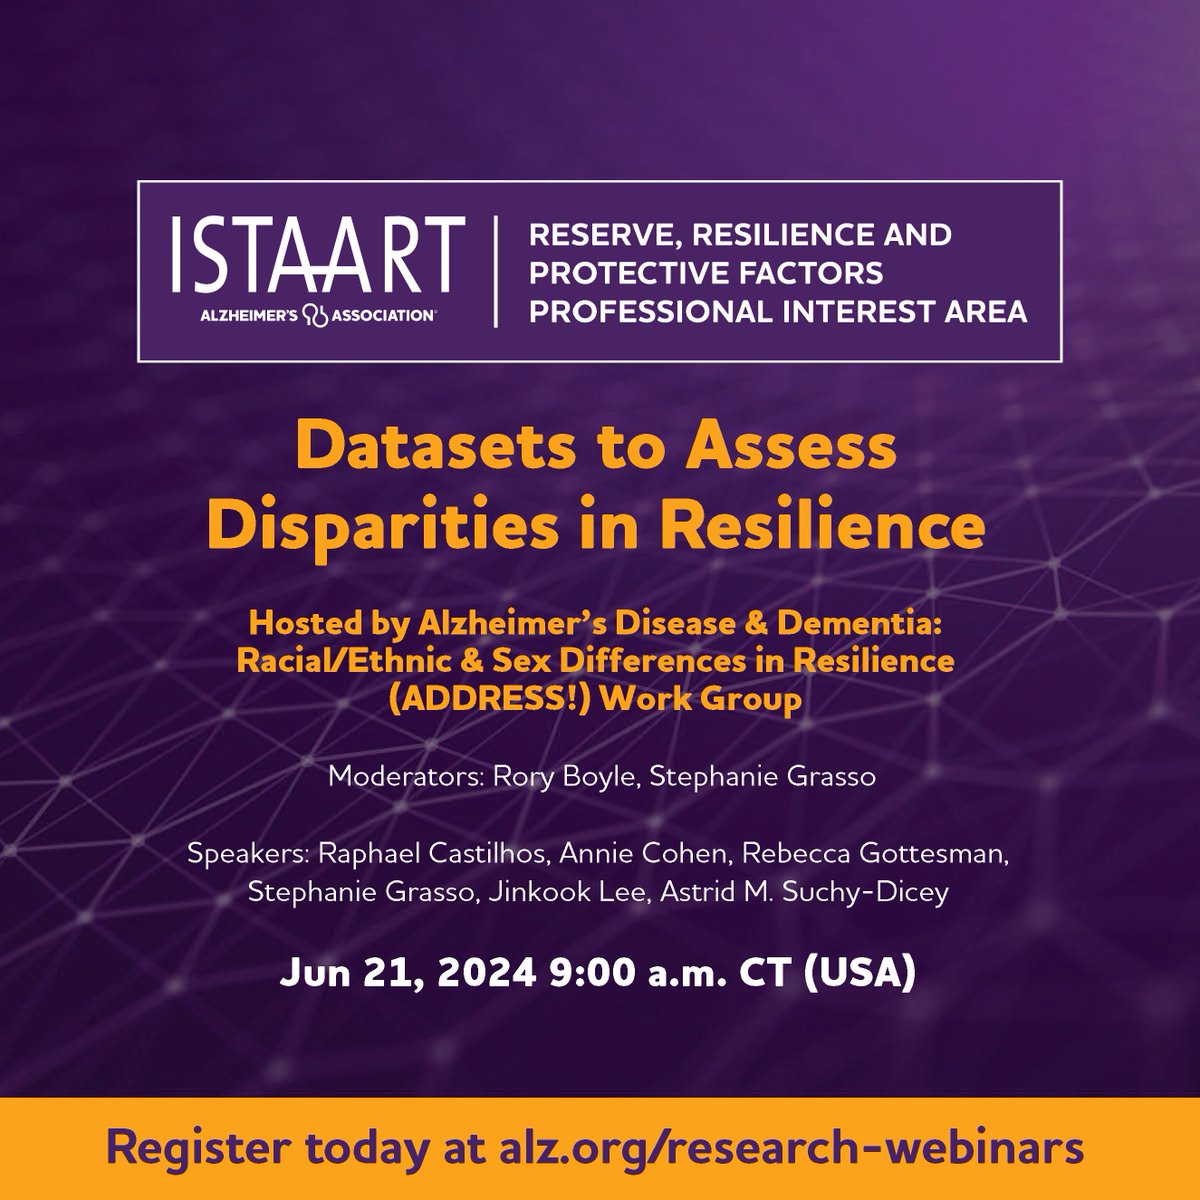 🚨Upcoming webinar Alert: Several speakers will provide an overview of different datasets that can be used to study racial/ethnic and sex differences in reserve and resilience. 🖊️Register here: training.alz.org/products/4735/… And stay tuned: @DDisparitiesPIA @ISTAART